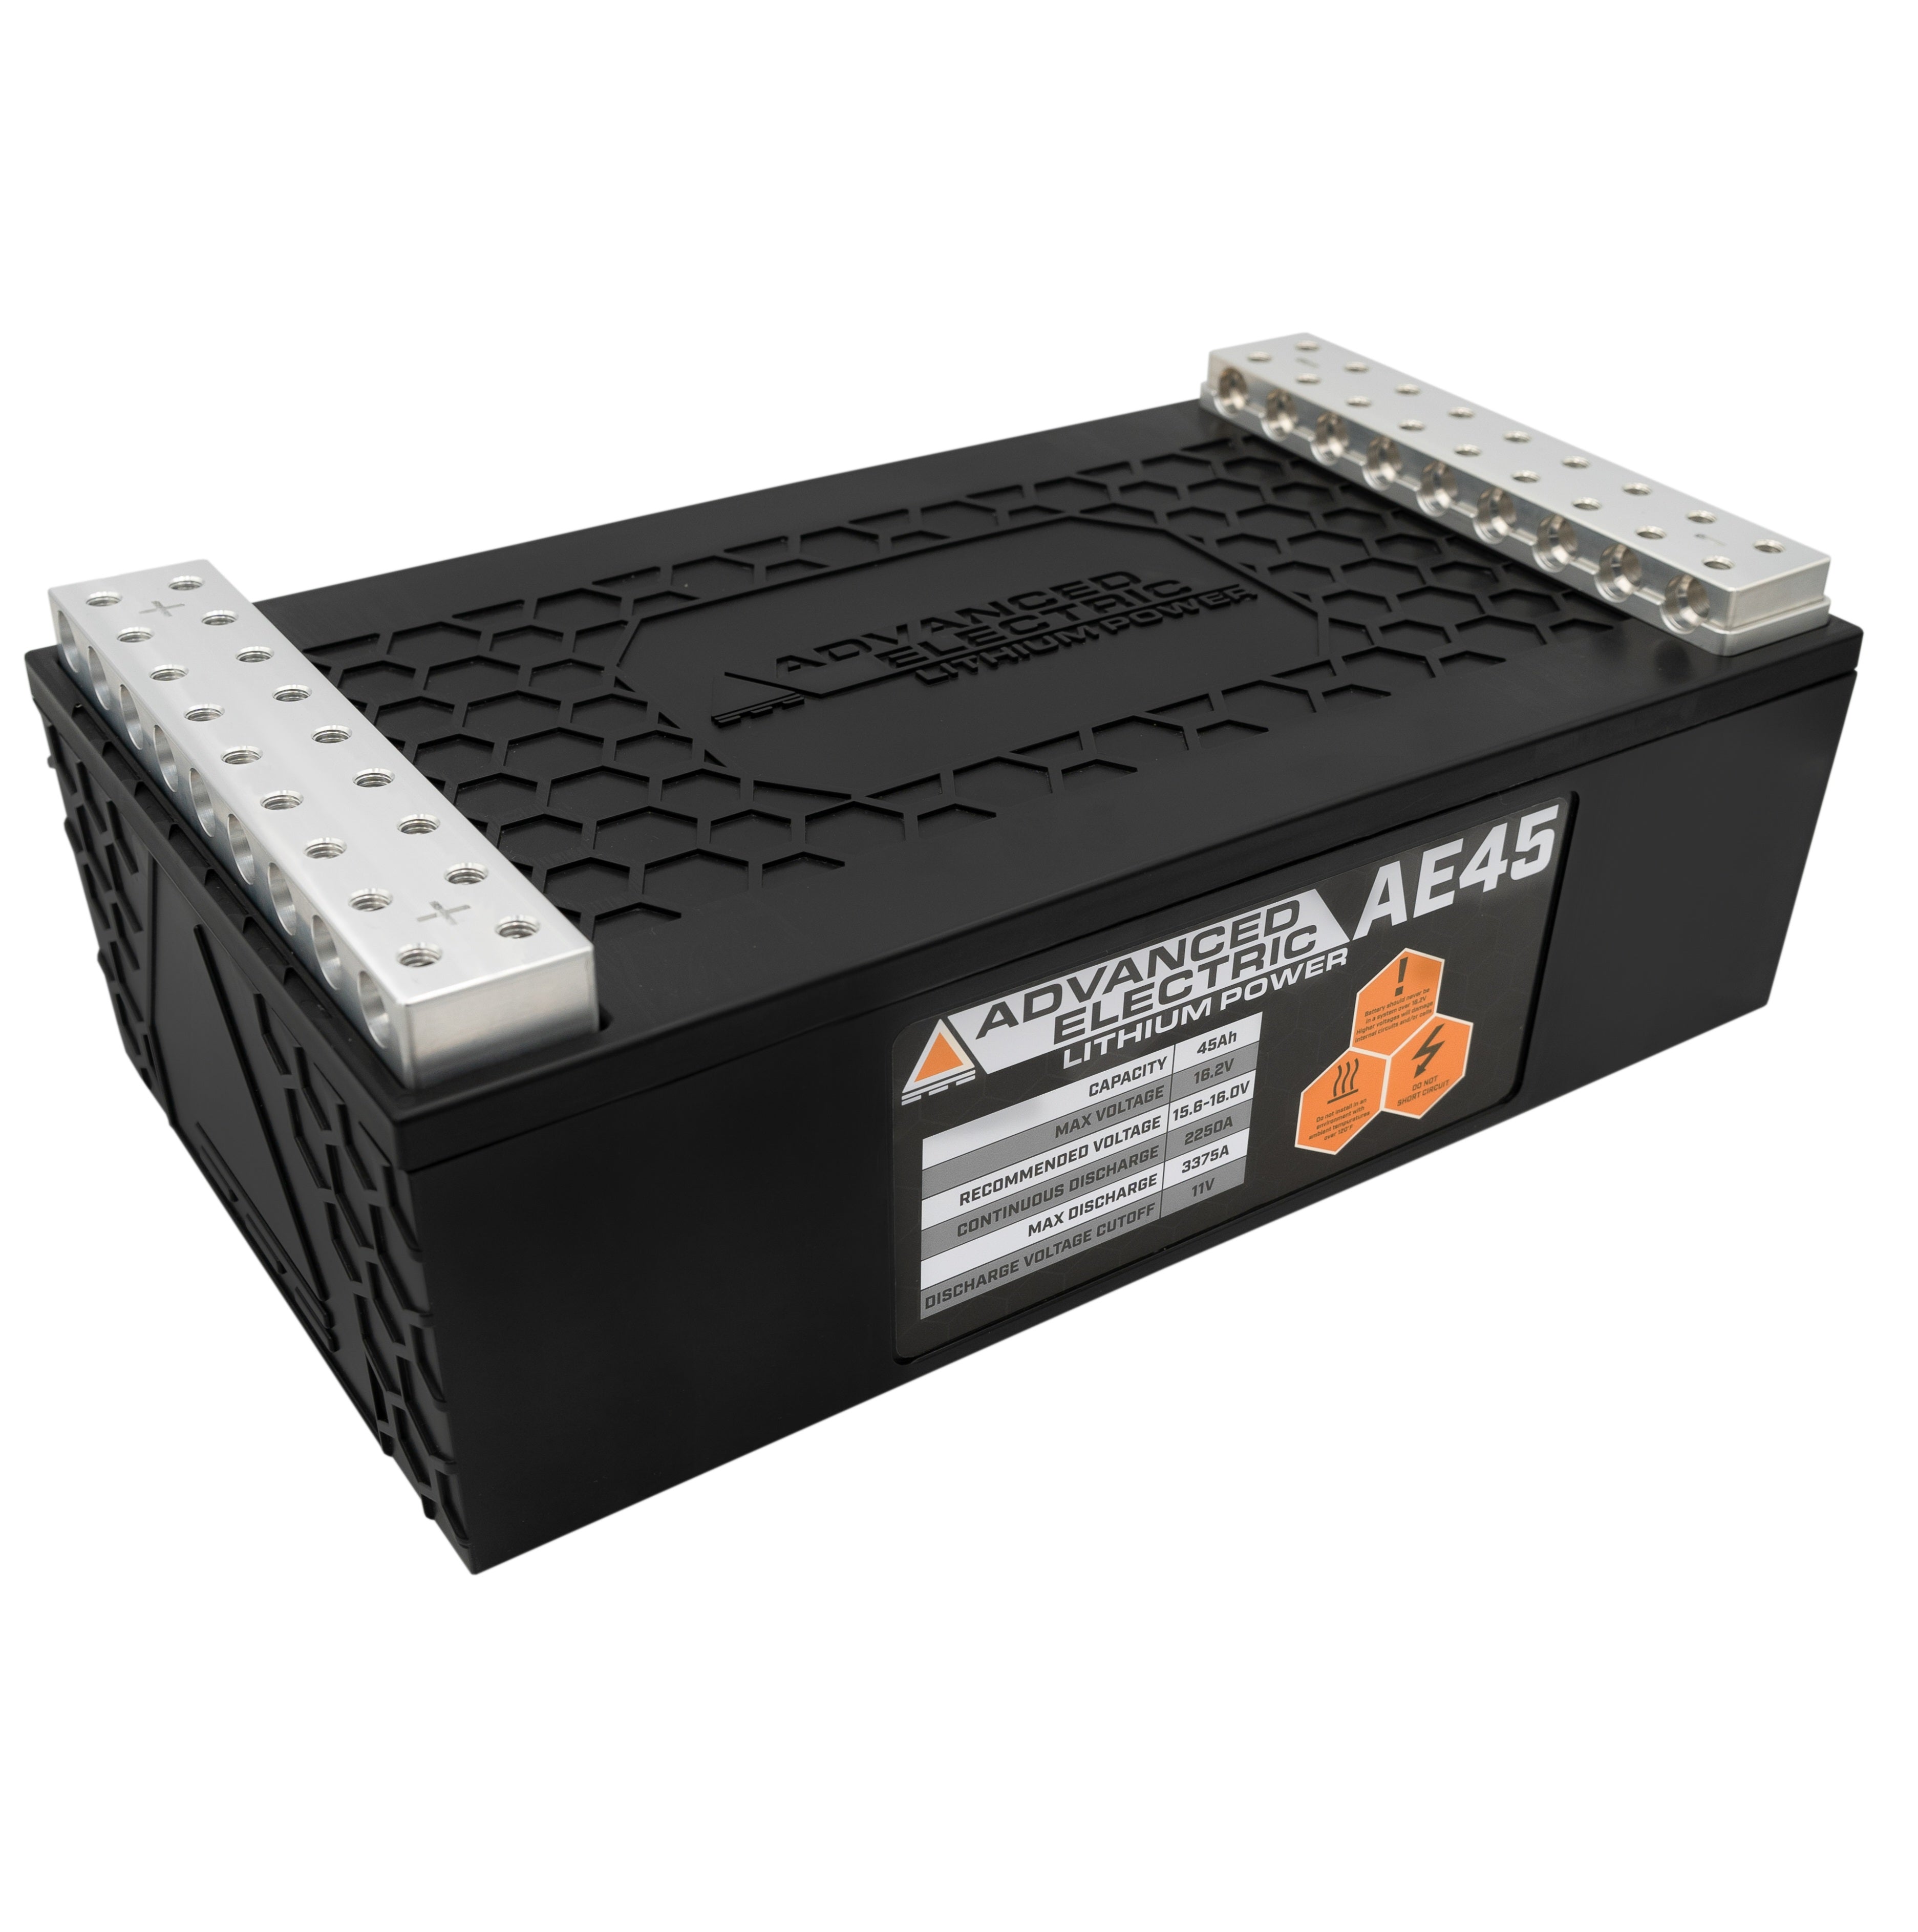 AE45 - 6S LTO Lithium Battery (SHIPS IN 1 DAY)